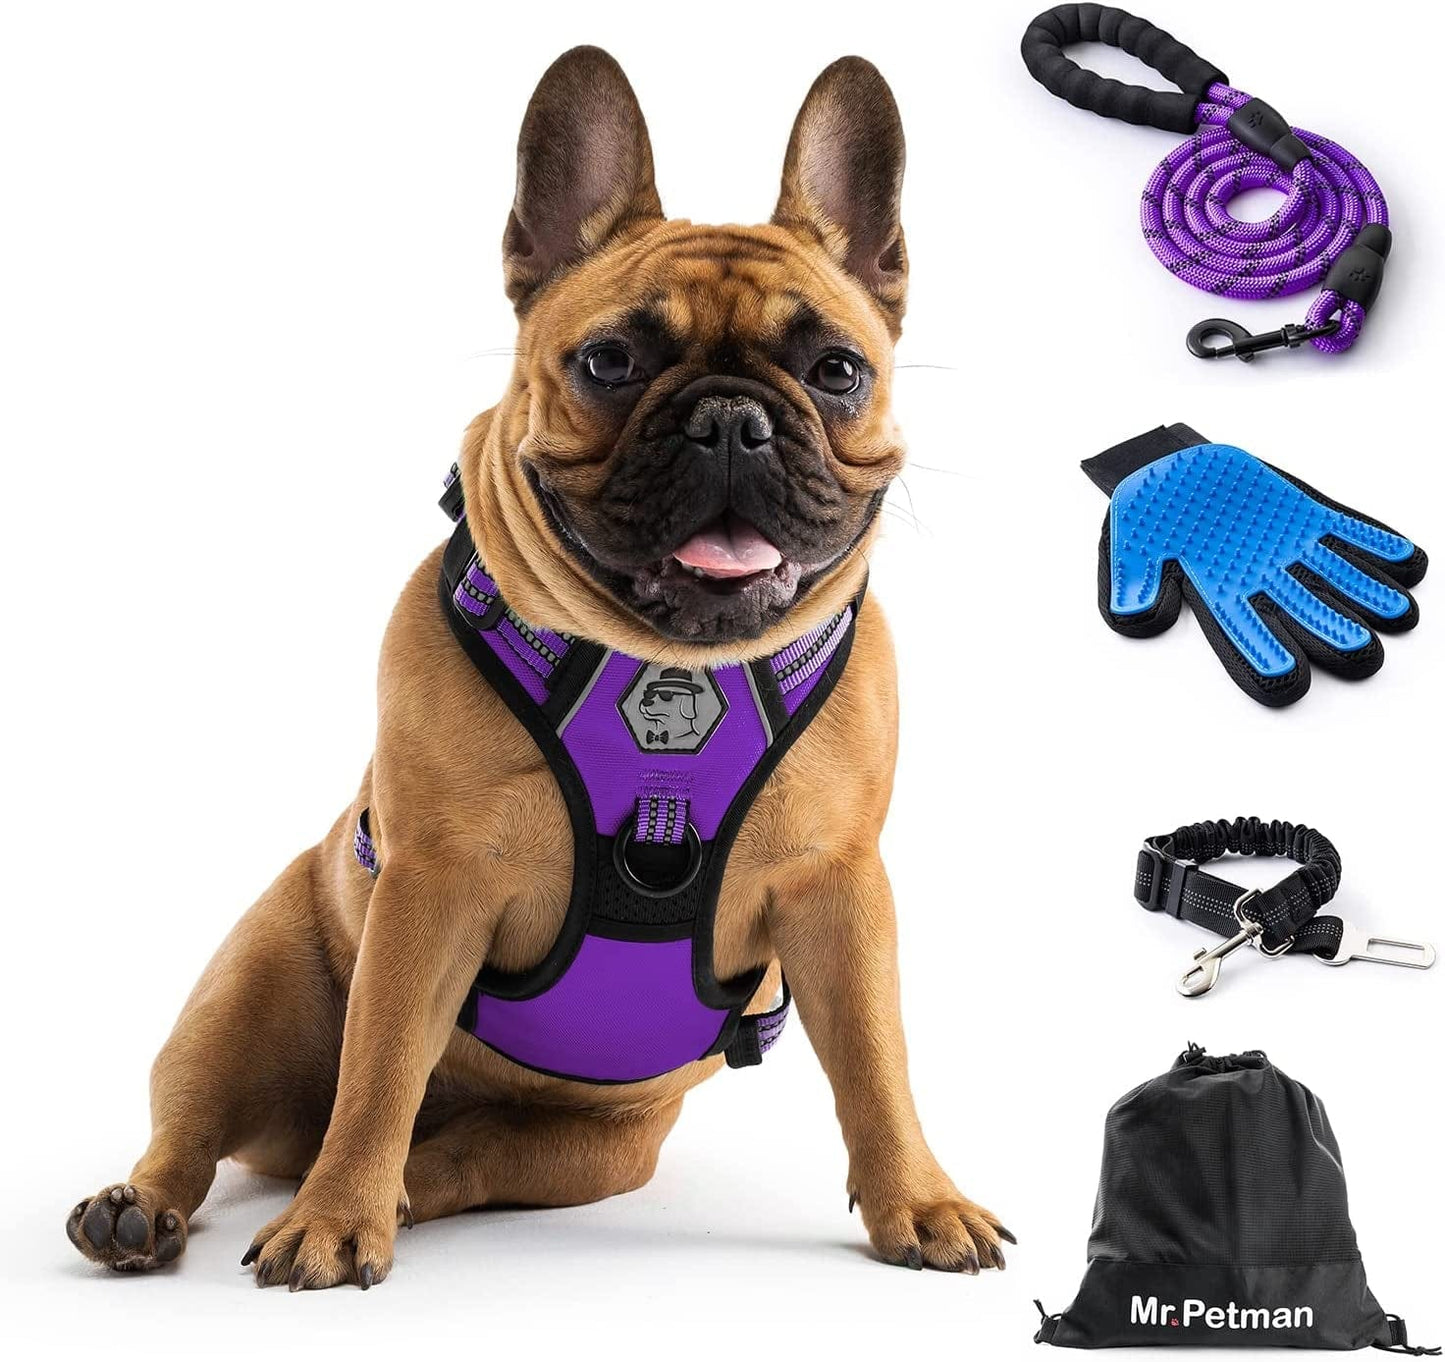 MR. PETMAN No Pull Dog Harness with Leash, Seat Belt, Grooming Glove - No Choke Dog Harness Set for Small Medium Large Dogs- Reflective Adjustable Dog Vest Harnesses with Handle for Walking Training